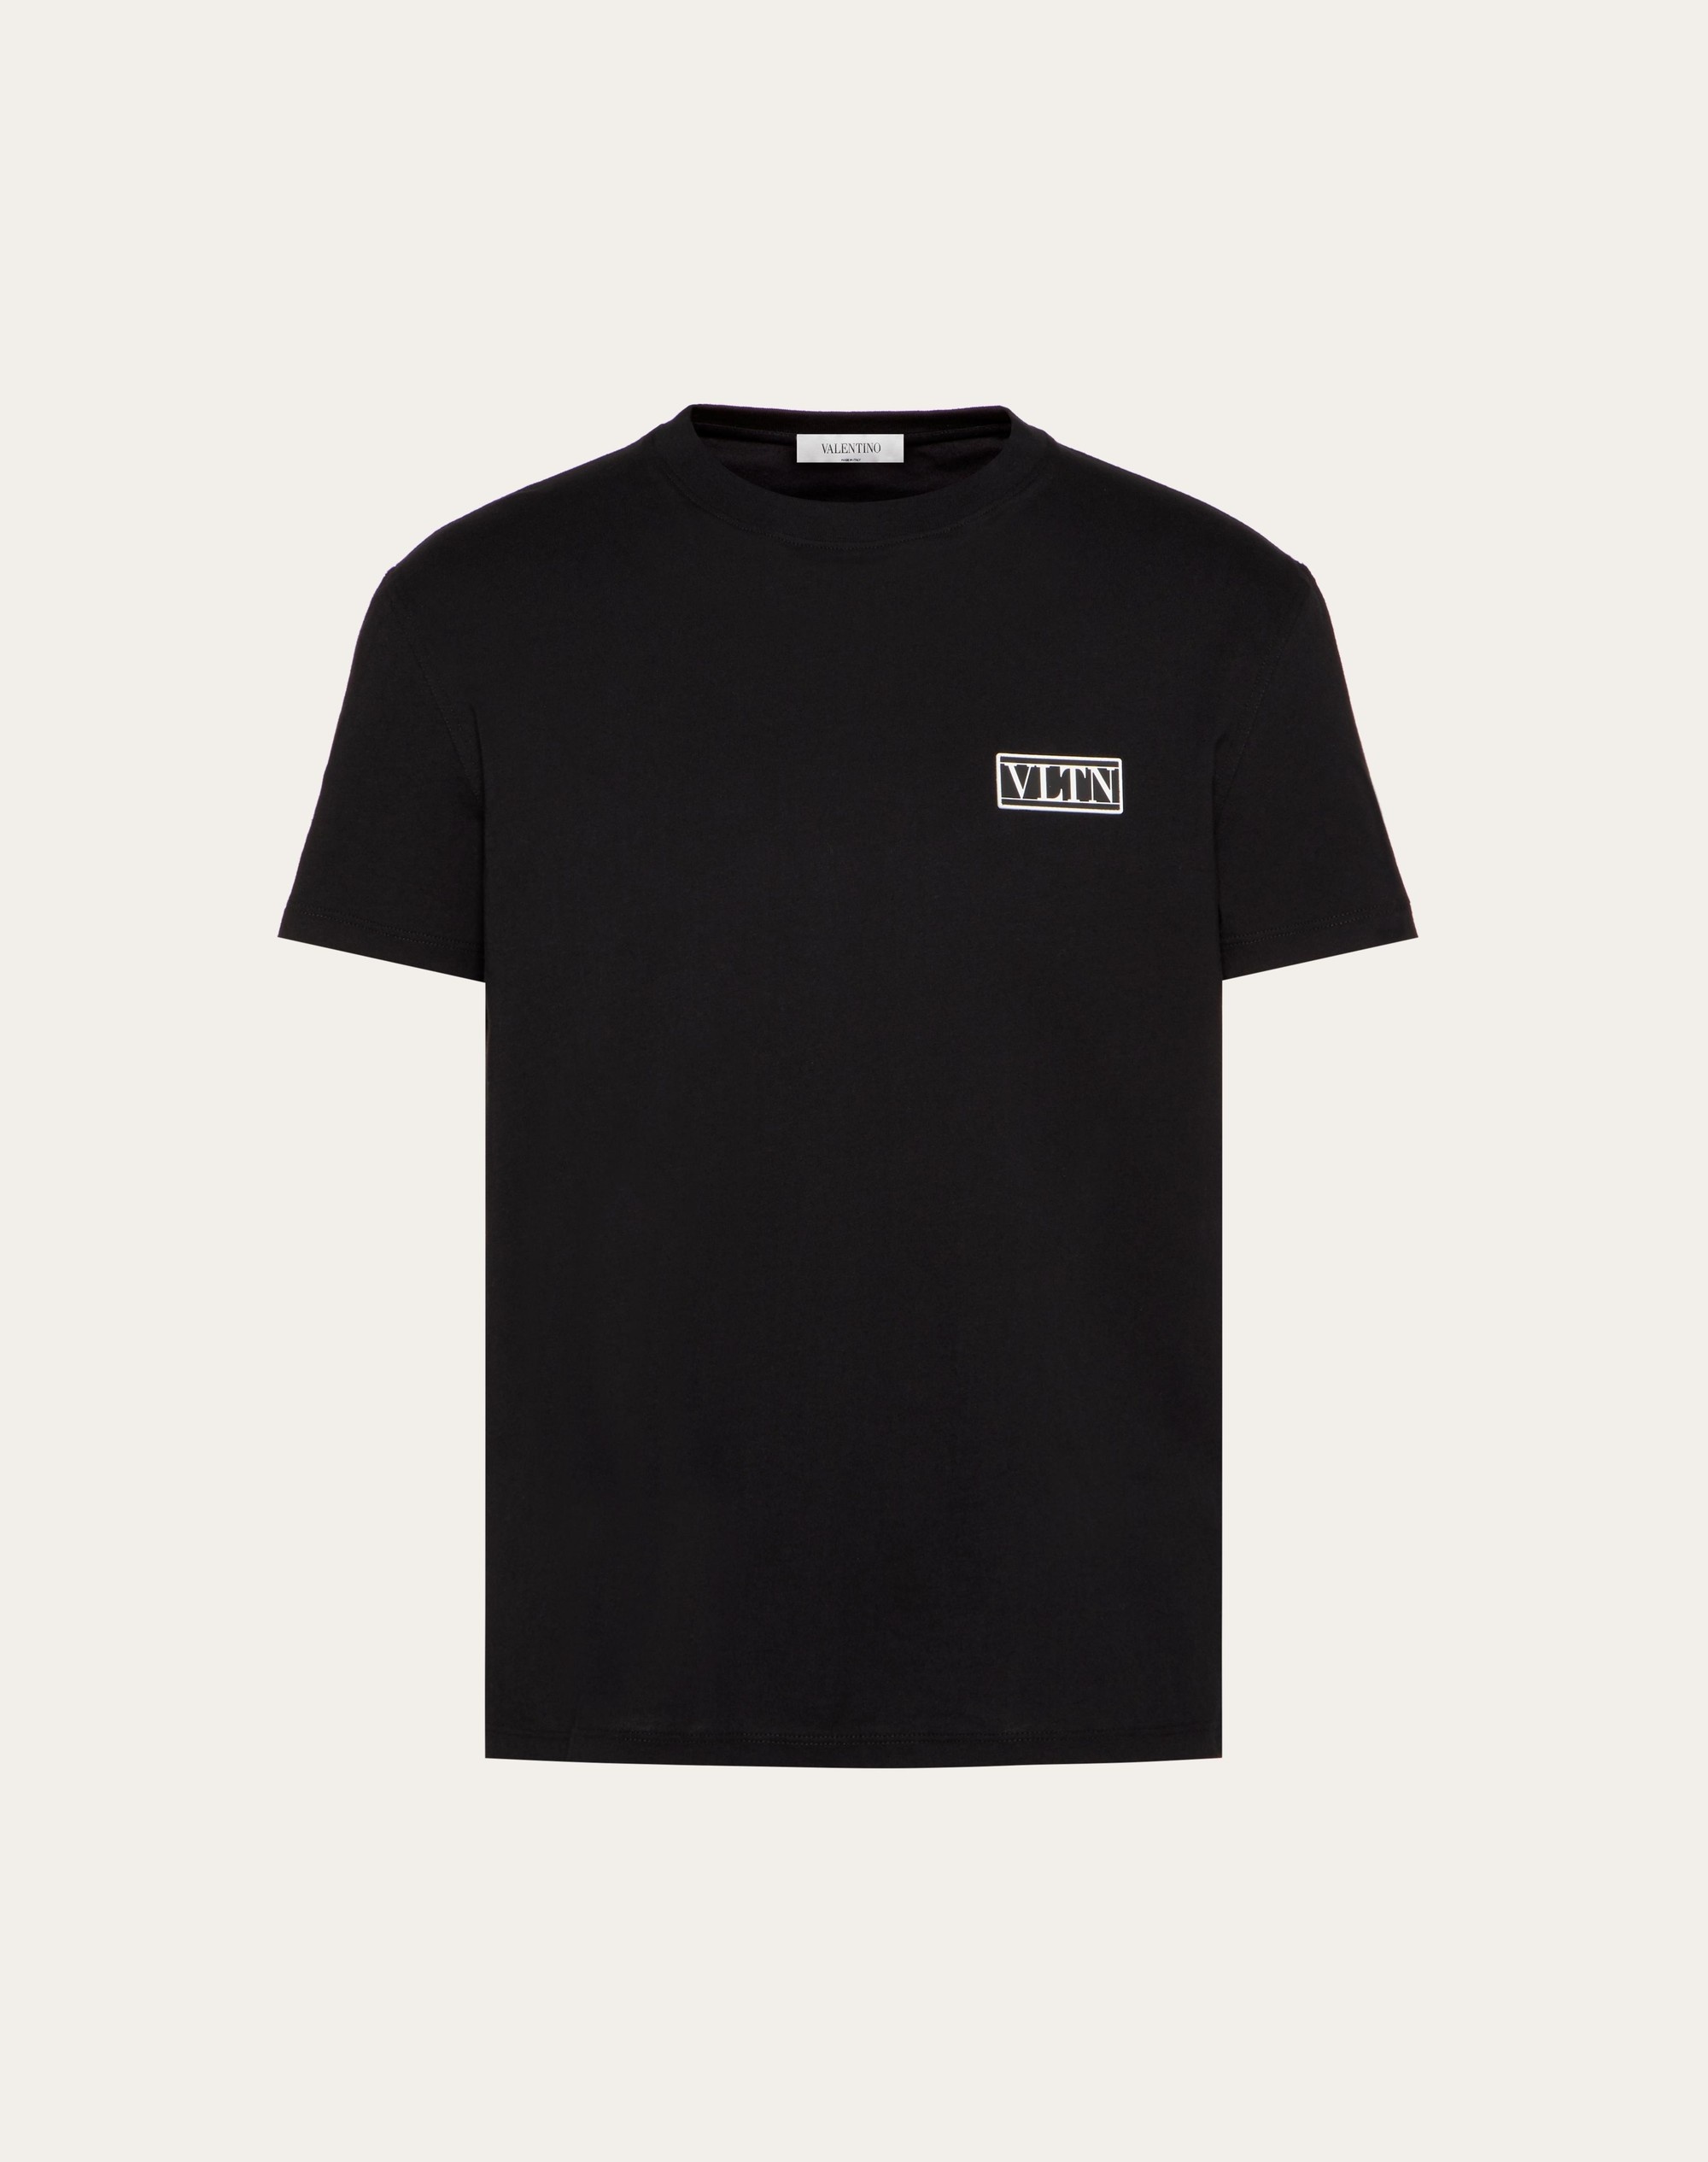 COTTON T-SHIRT WITH VLTN TAG - 1